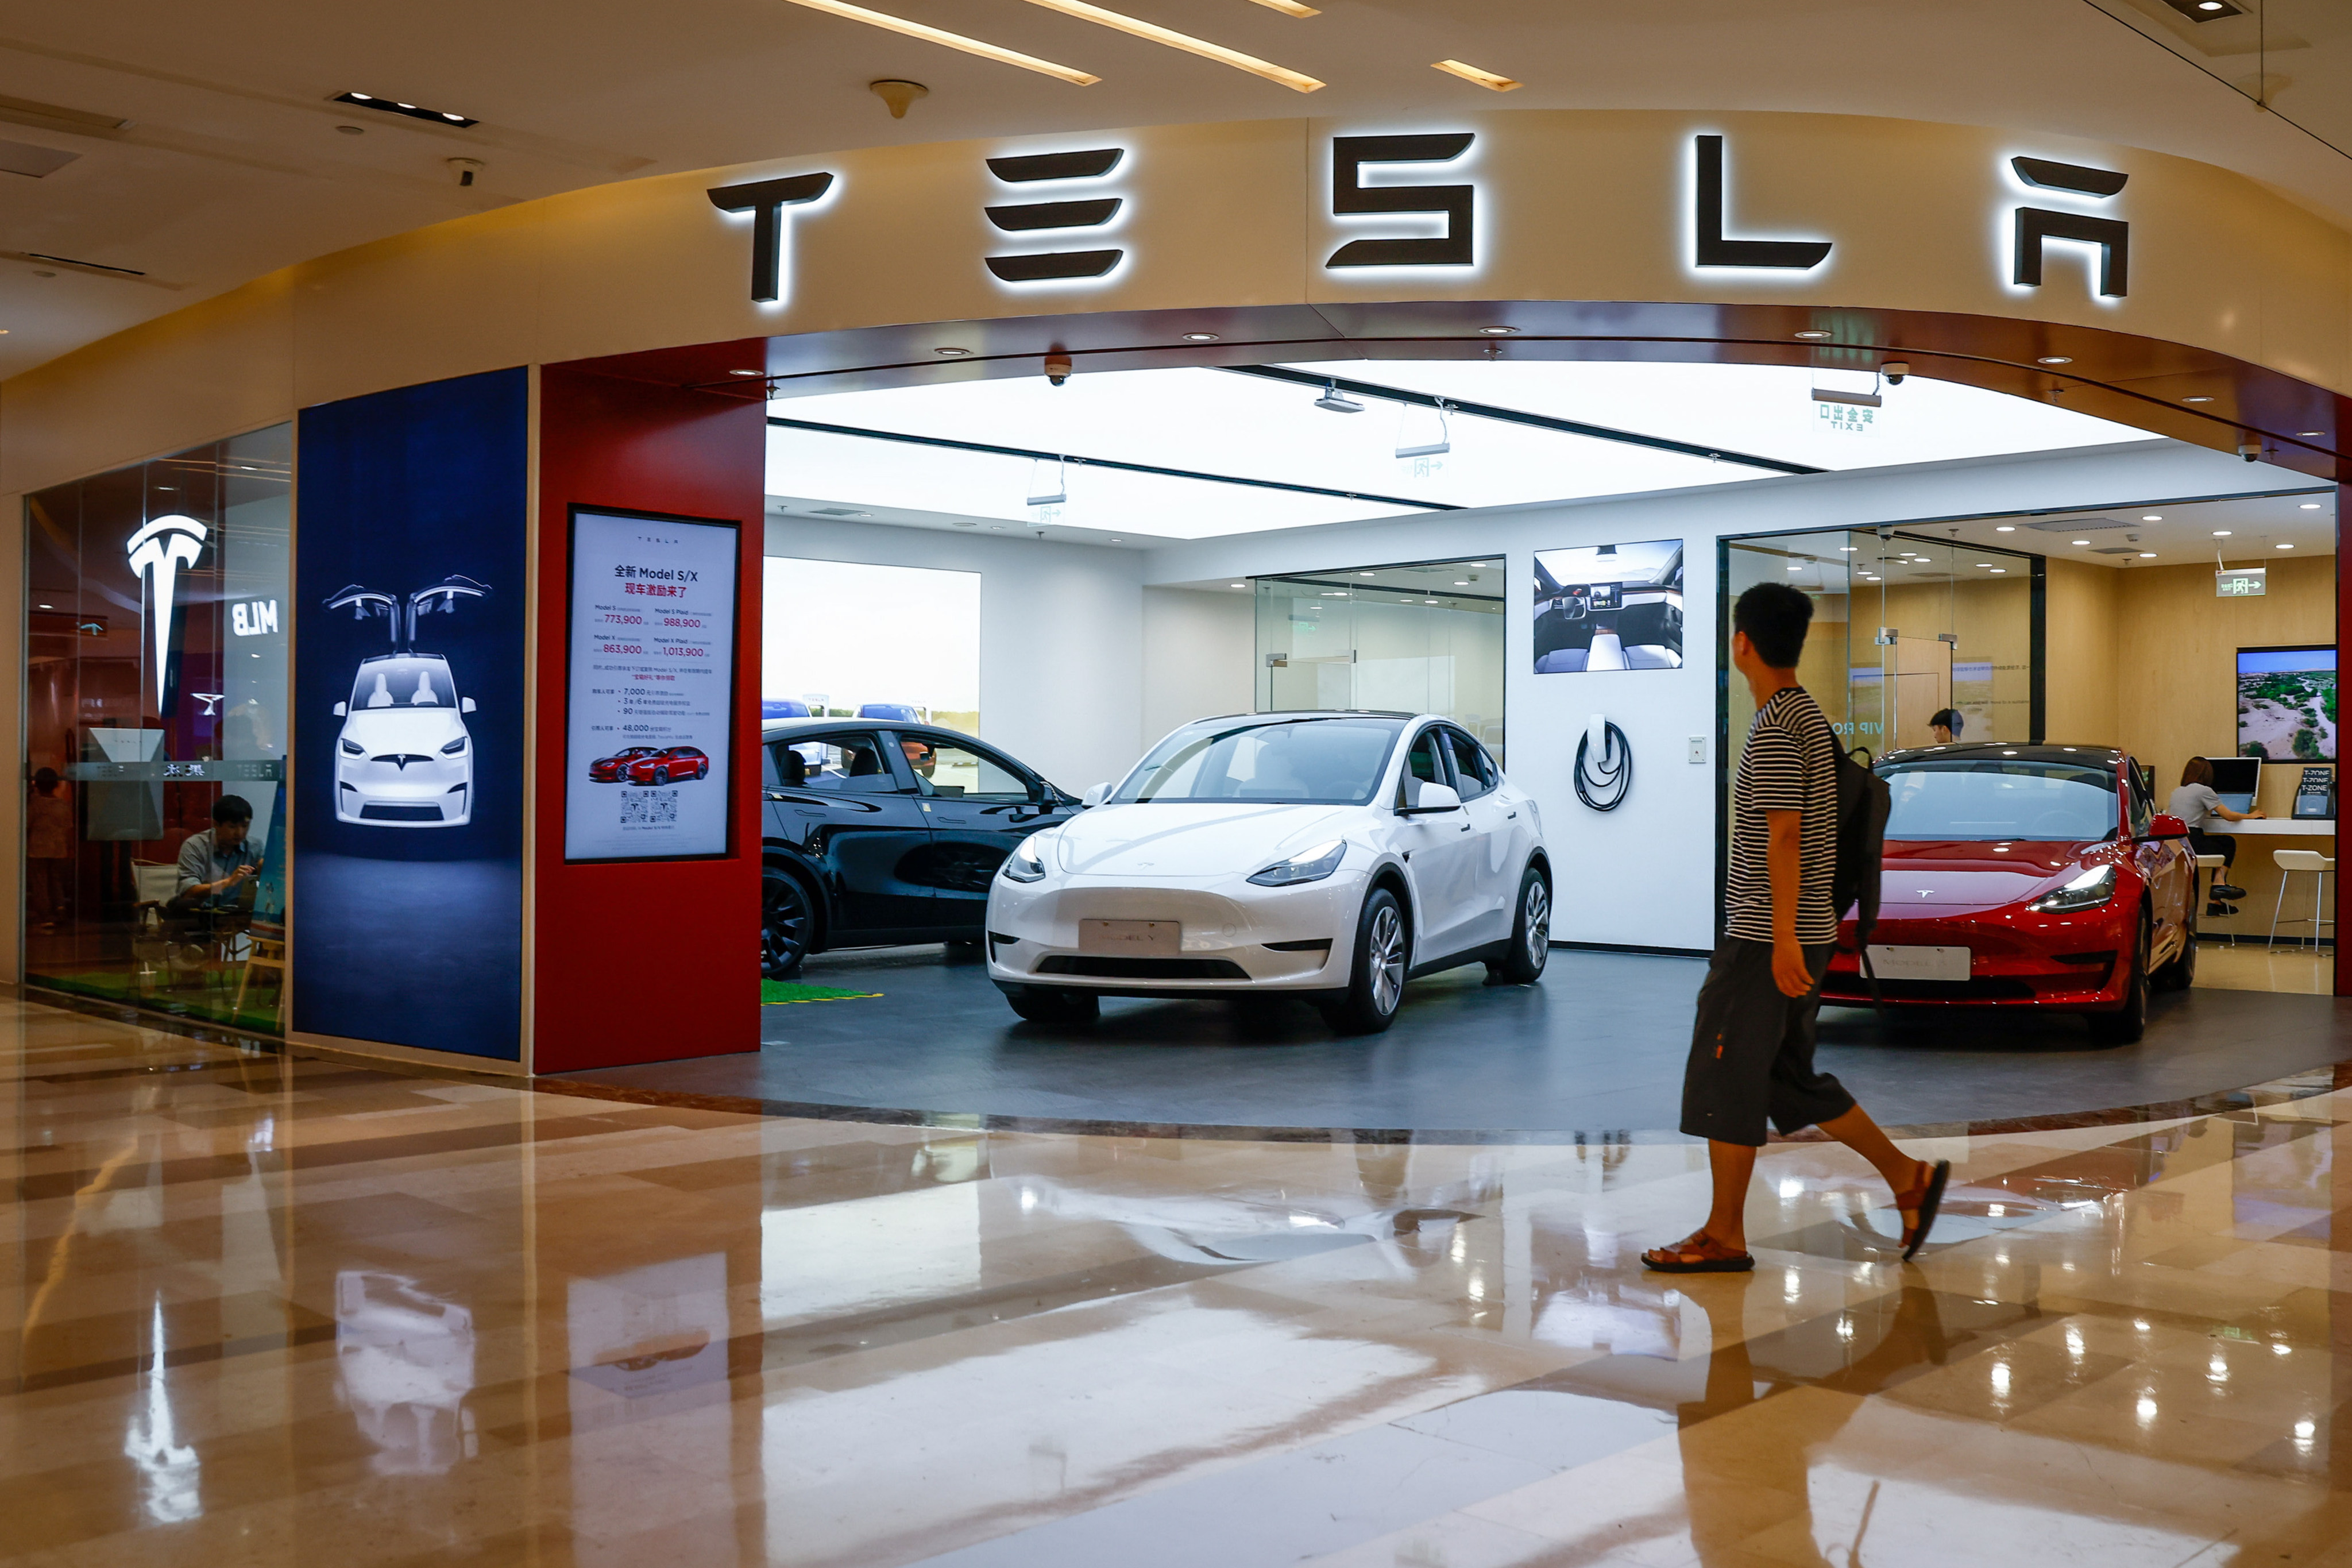 Tesla cars are displayed at a showroom in Beijing, China. The US carmaker’s sales have slowed down in mainland China. Photo: EPA-EFE